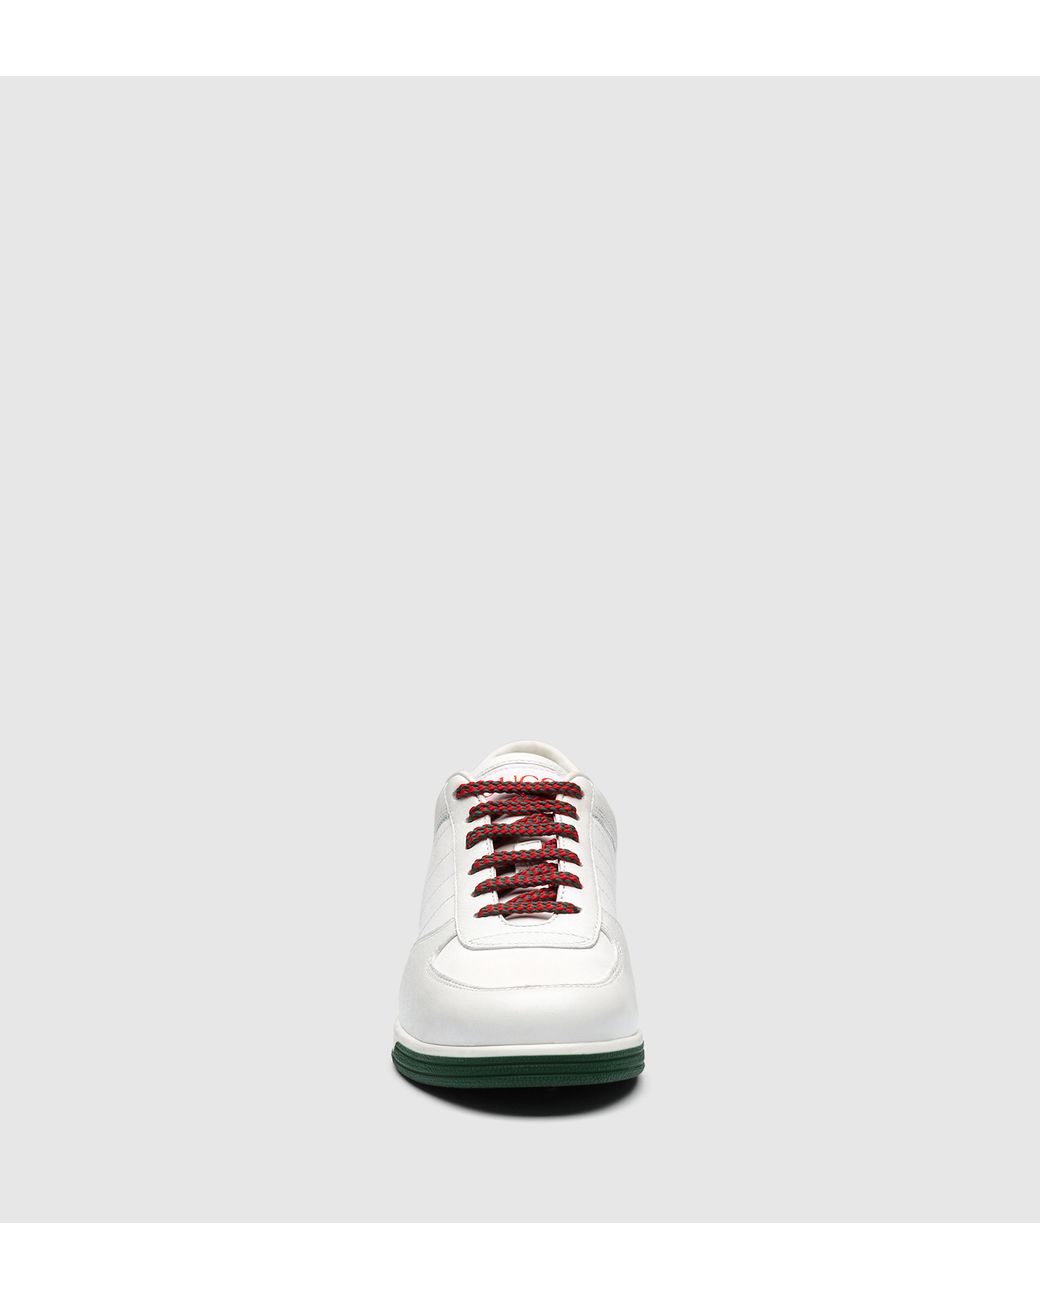 Gucci 1984 Low Top Sneaker In Leather in White | Lyst